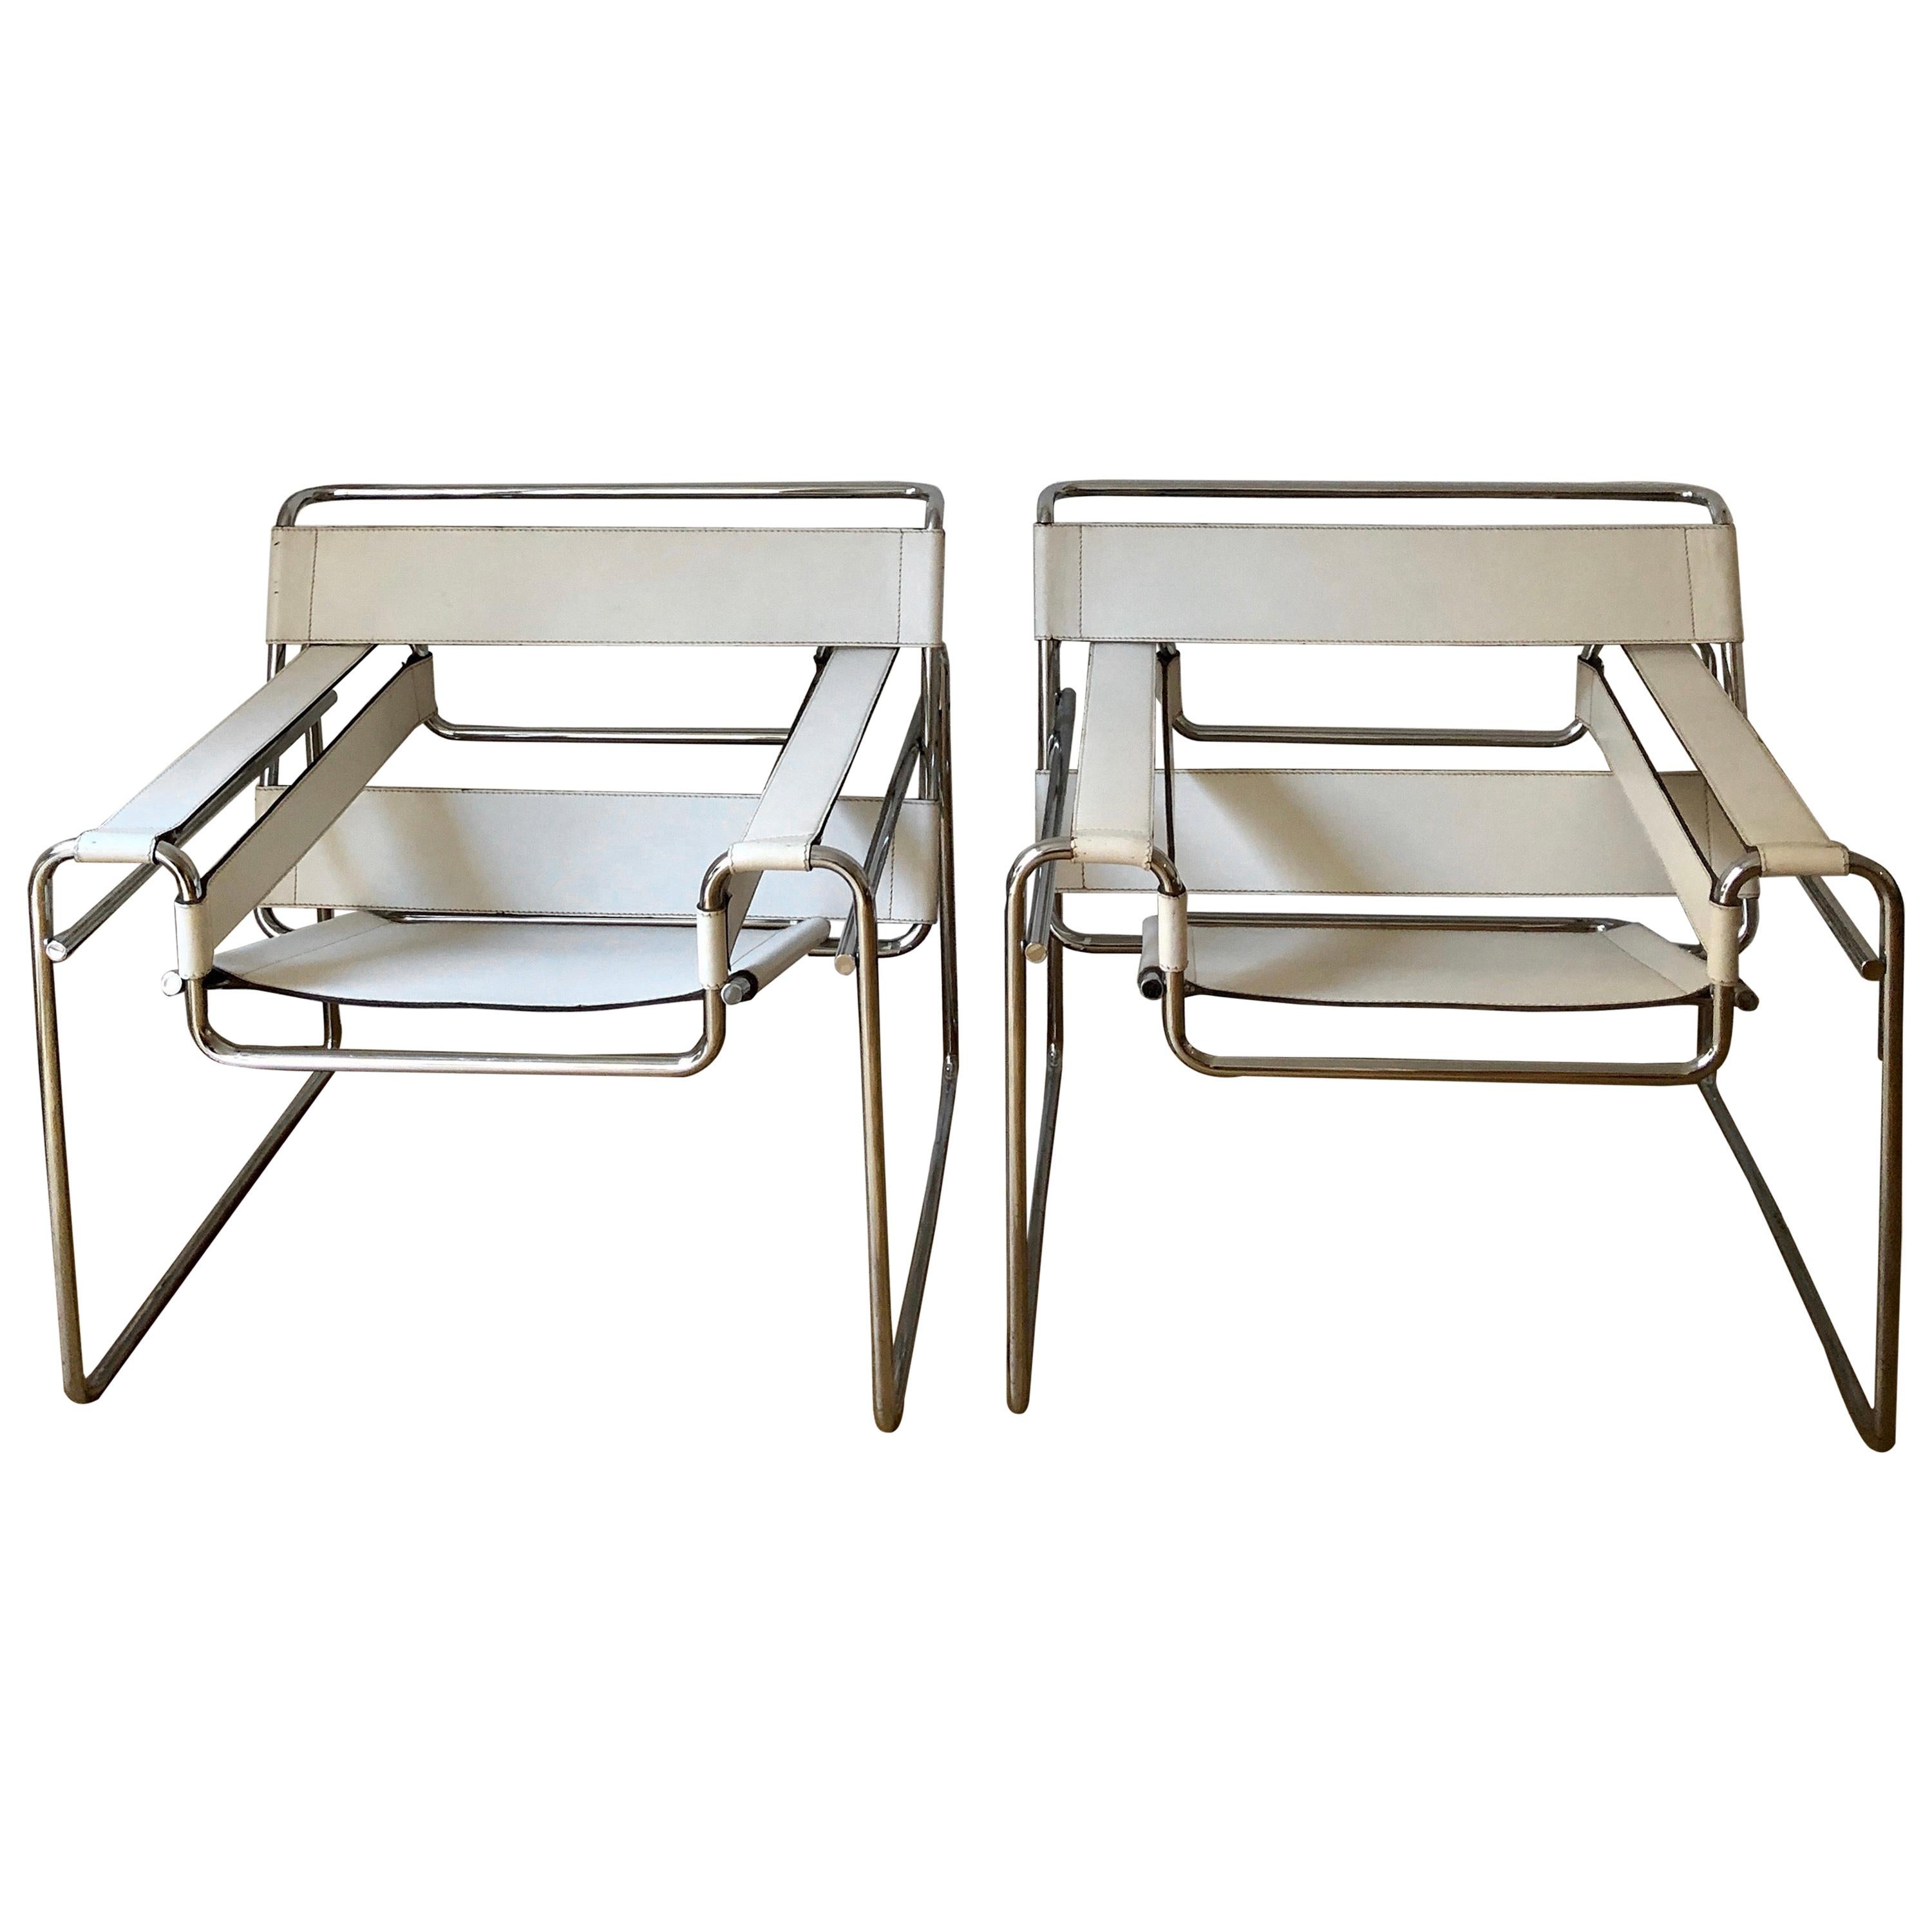 Pair of Wassily Lounge Chair White Leather by Marcel Breuer, Gavina, circa 1962